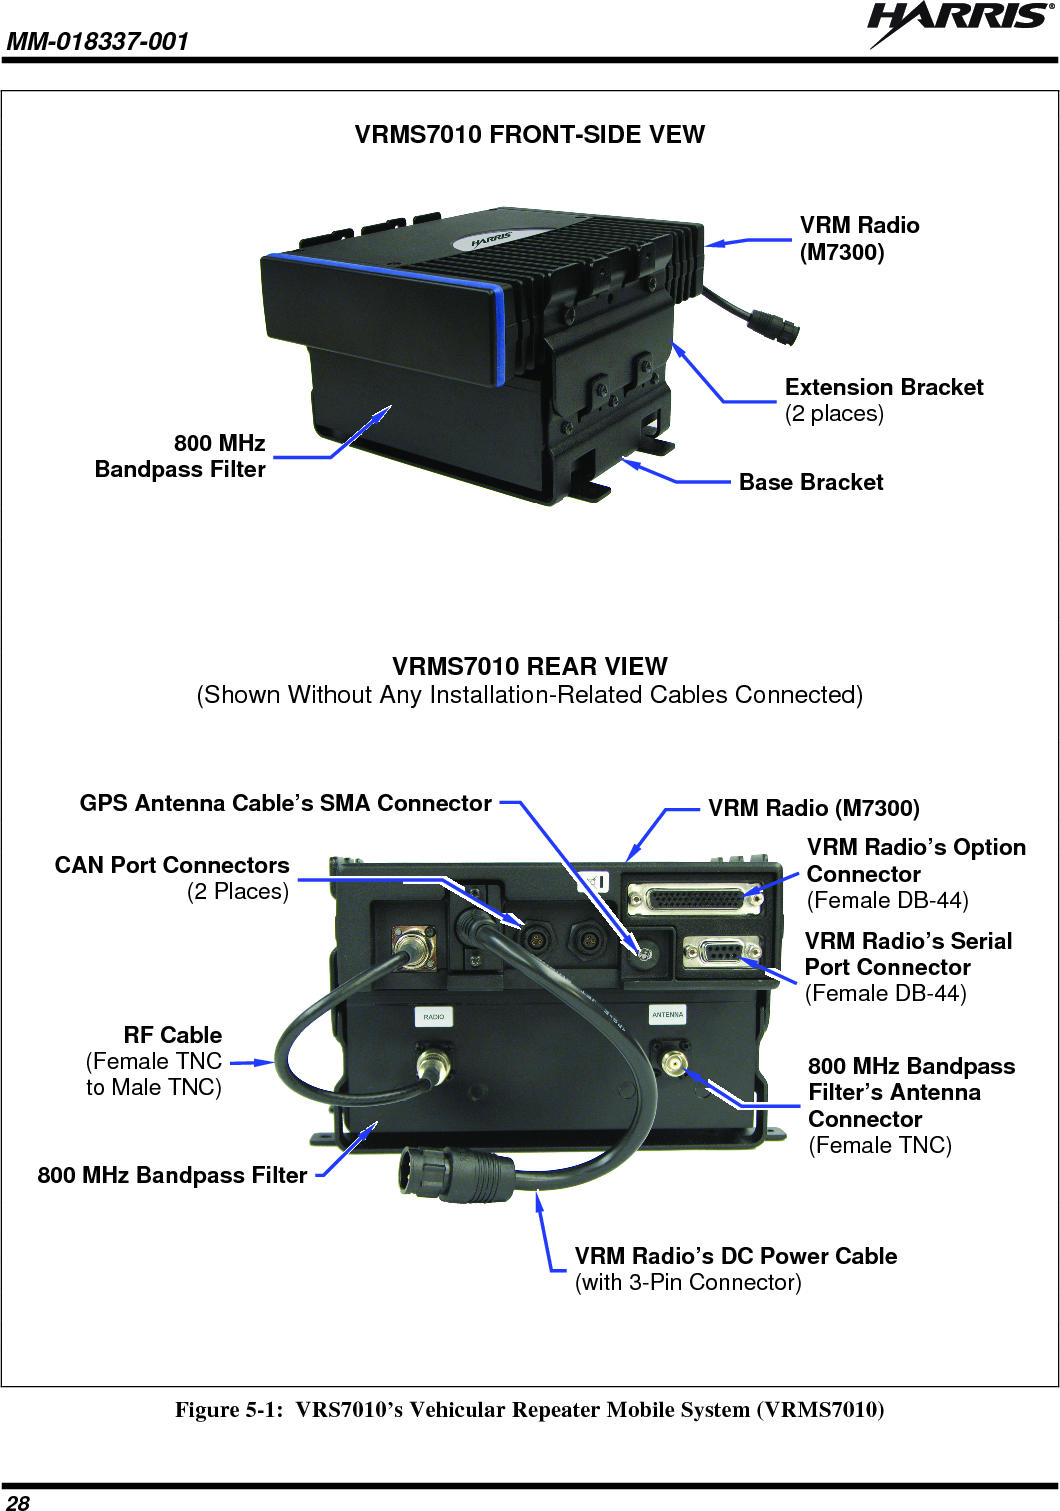 MM-018337-001   28  VRMS7010 FRONT-SIDE VEW         VRMS7010 REAR VIEW (Shown Without Any Installation-Related Cables Connected)             Figure 5-1:  VRS7010’s Vehicular Repeater Mobile System (VRMS7010) VRM Radio’s Option Connector (Female DB-44) 800 MHz Bandpass FilterGPS Antenna Cable’s SMA Connector800 MHz Bandpass Filter’s Antenna Connector (Female TNC) CAN Port Connectors (2 Places) VRM Radio (M7300) 800 MHzBandpass FilterBase Bracket Extension Bracket (2 places) RF Cable(Female TNCto Male TNC)VRM Radio (M7300) VRM Radio’s DC Power Cable (with 3-Pin Connector) VRM Radio’s Serial Port Connector (Female DB-44) 